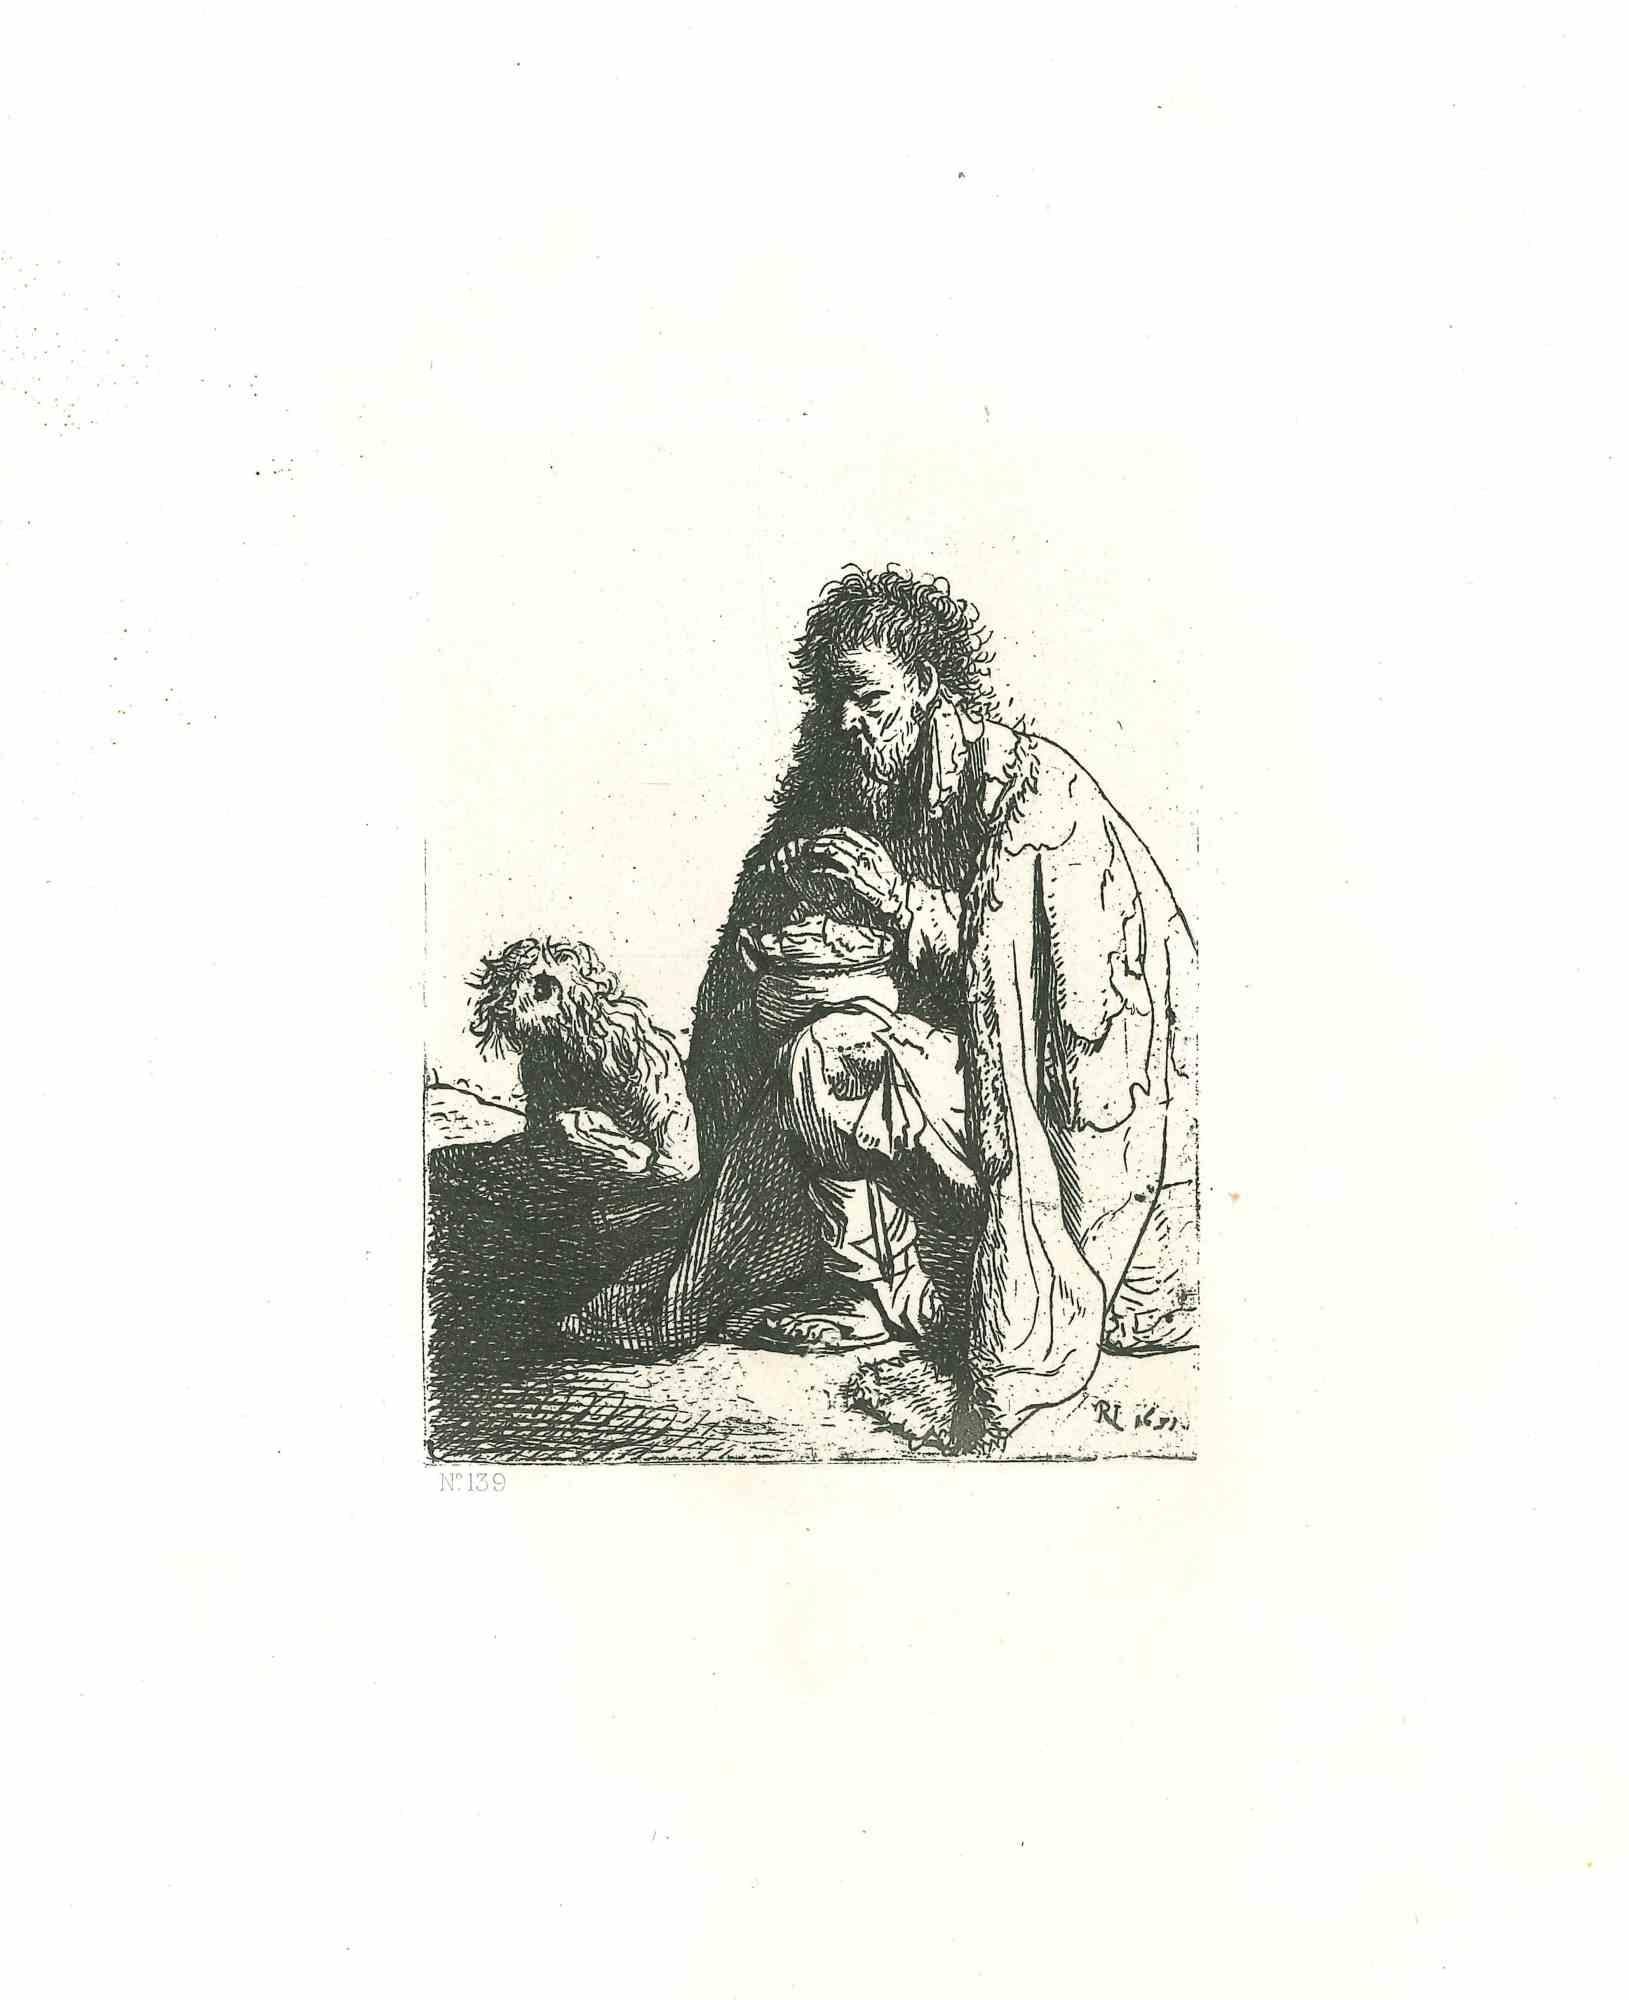 Charles Amand Durand Figurative Print - Seated Beggar and His Dog - Engraving after Rembrandt - 19th Century